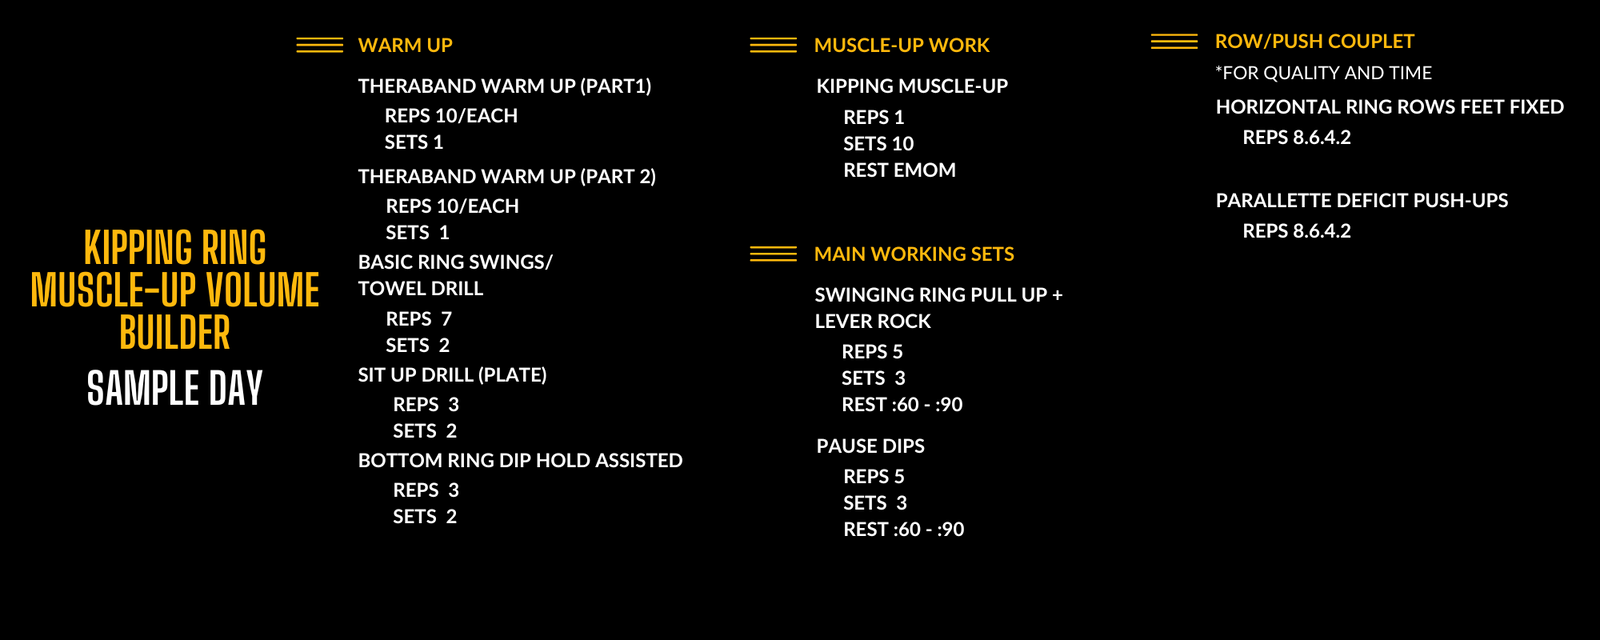 Sample training day from the kipping ring muscle up volume builder plan in the power monkey training app.